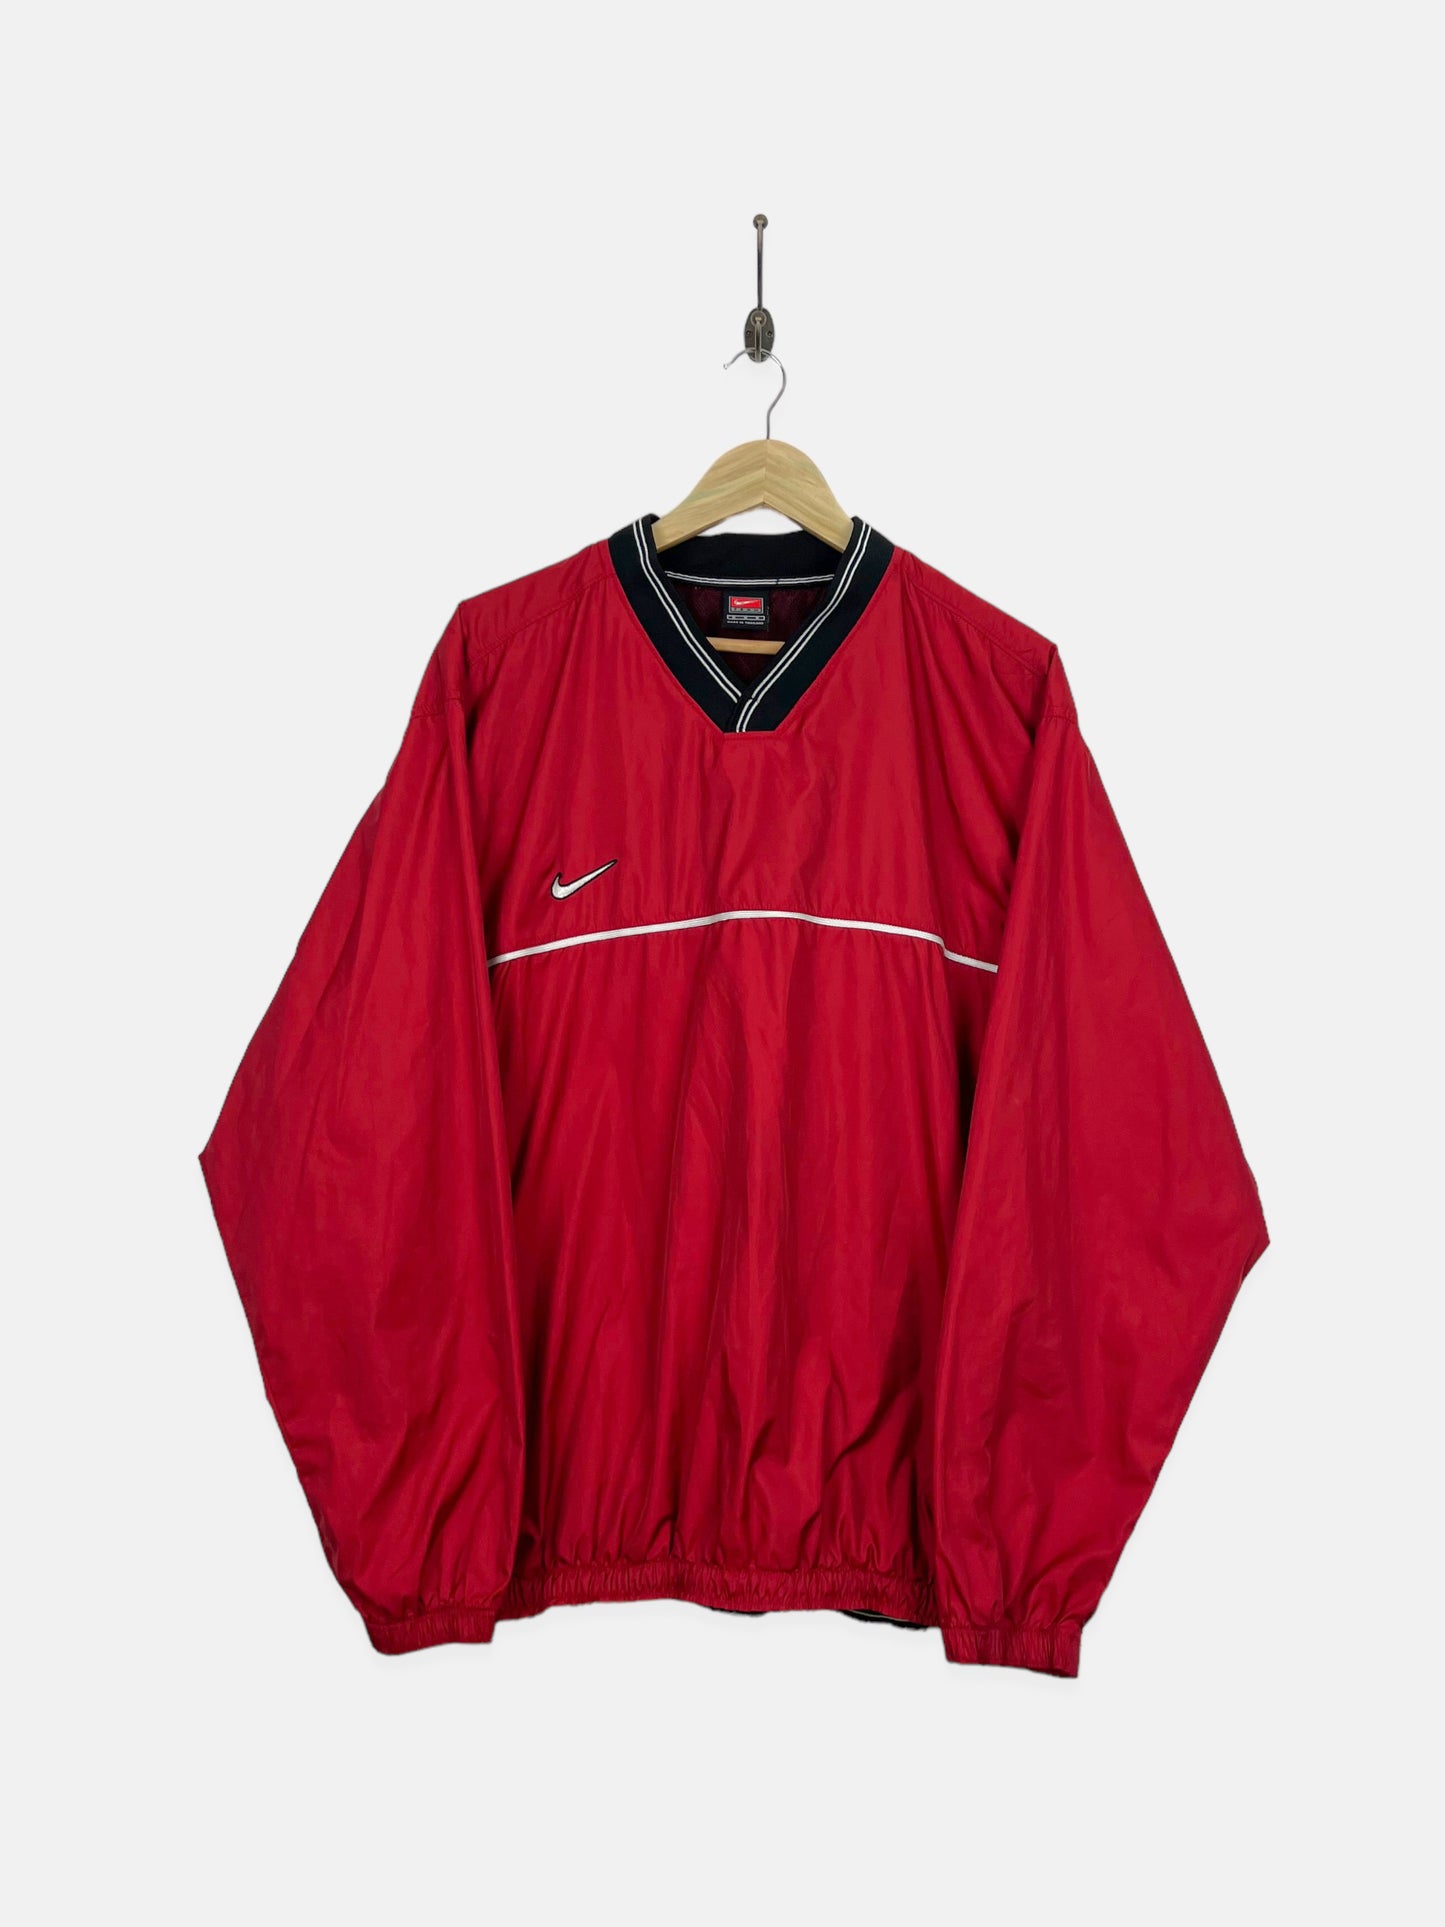 90's Nike Embroidered Windbreaker Size L